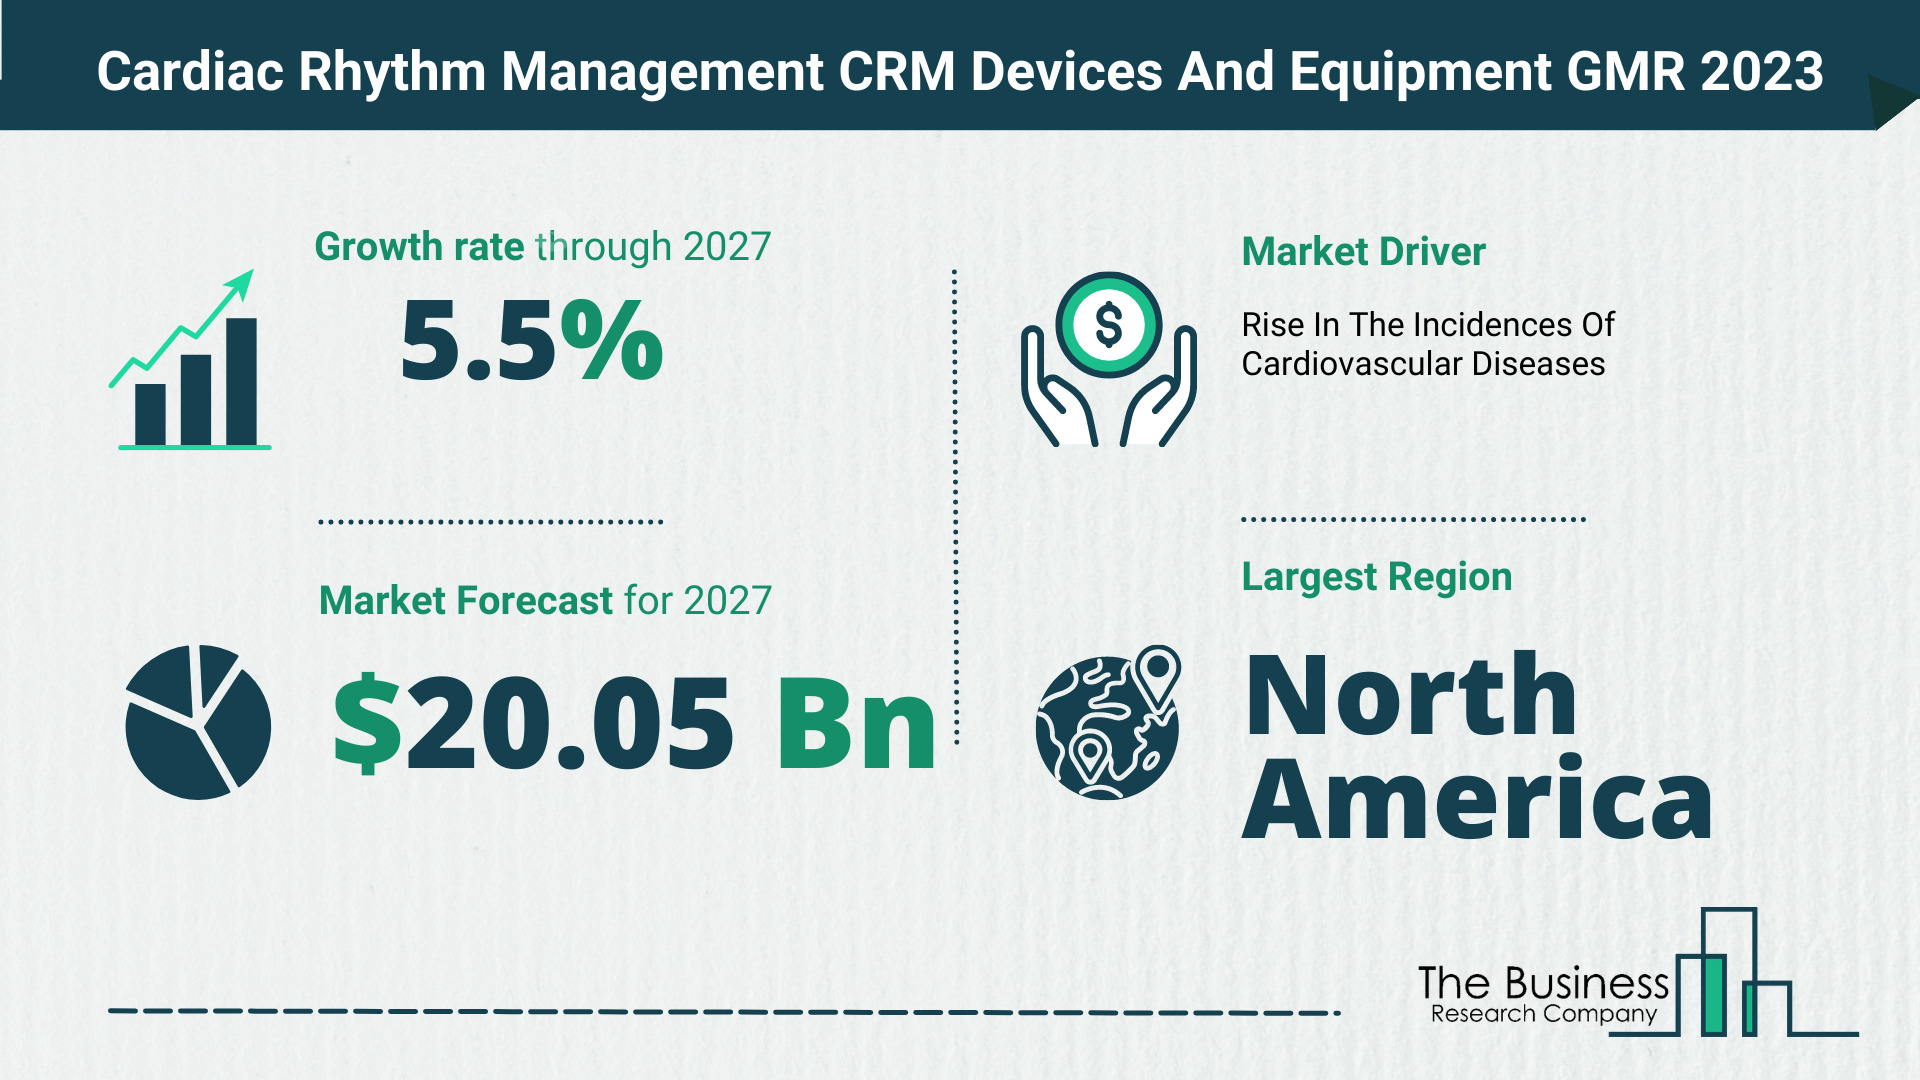 How Will The Cardiac Rhythm Management CRM Devices And Equipment Market Size Grow In The Coming Years?